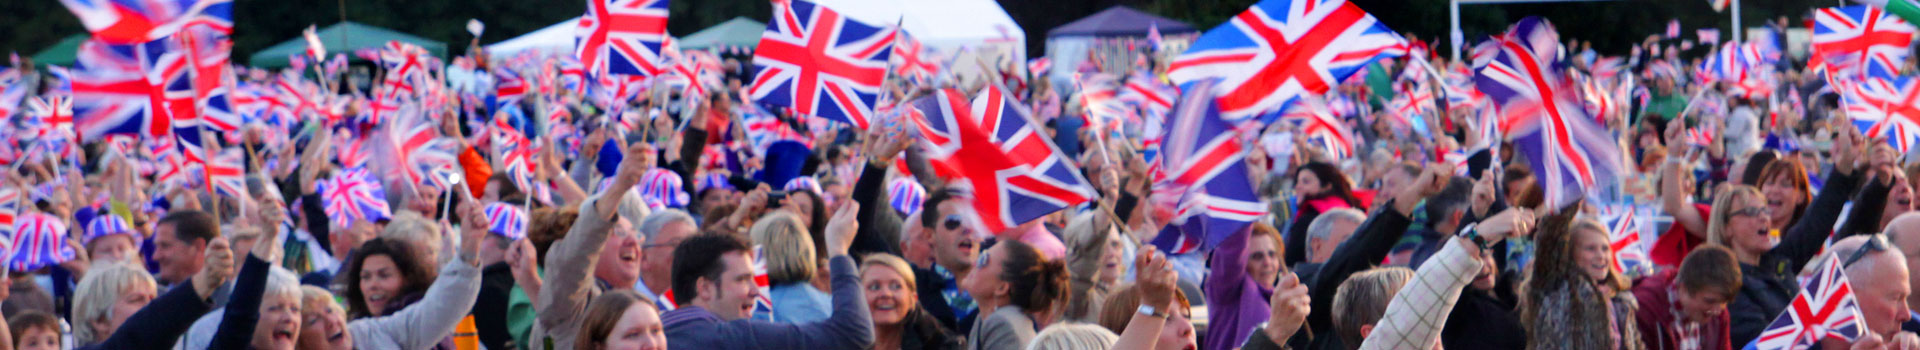 Sponsorship and advertising opportunities are available for Lichfield Proms in Beacon Park.